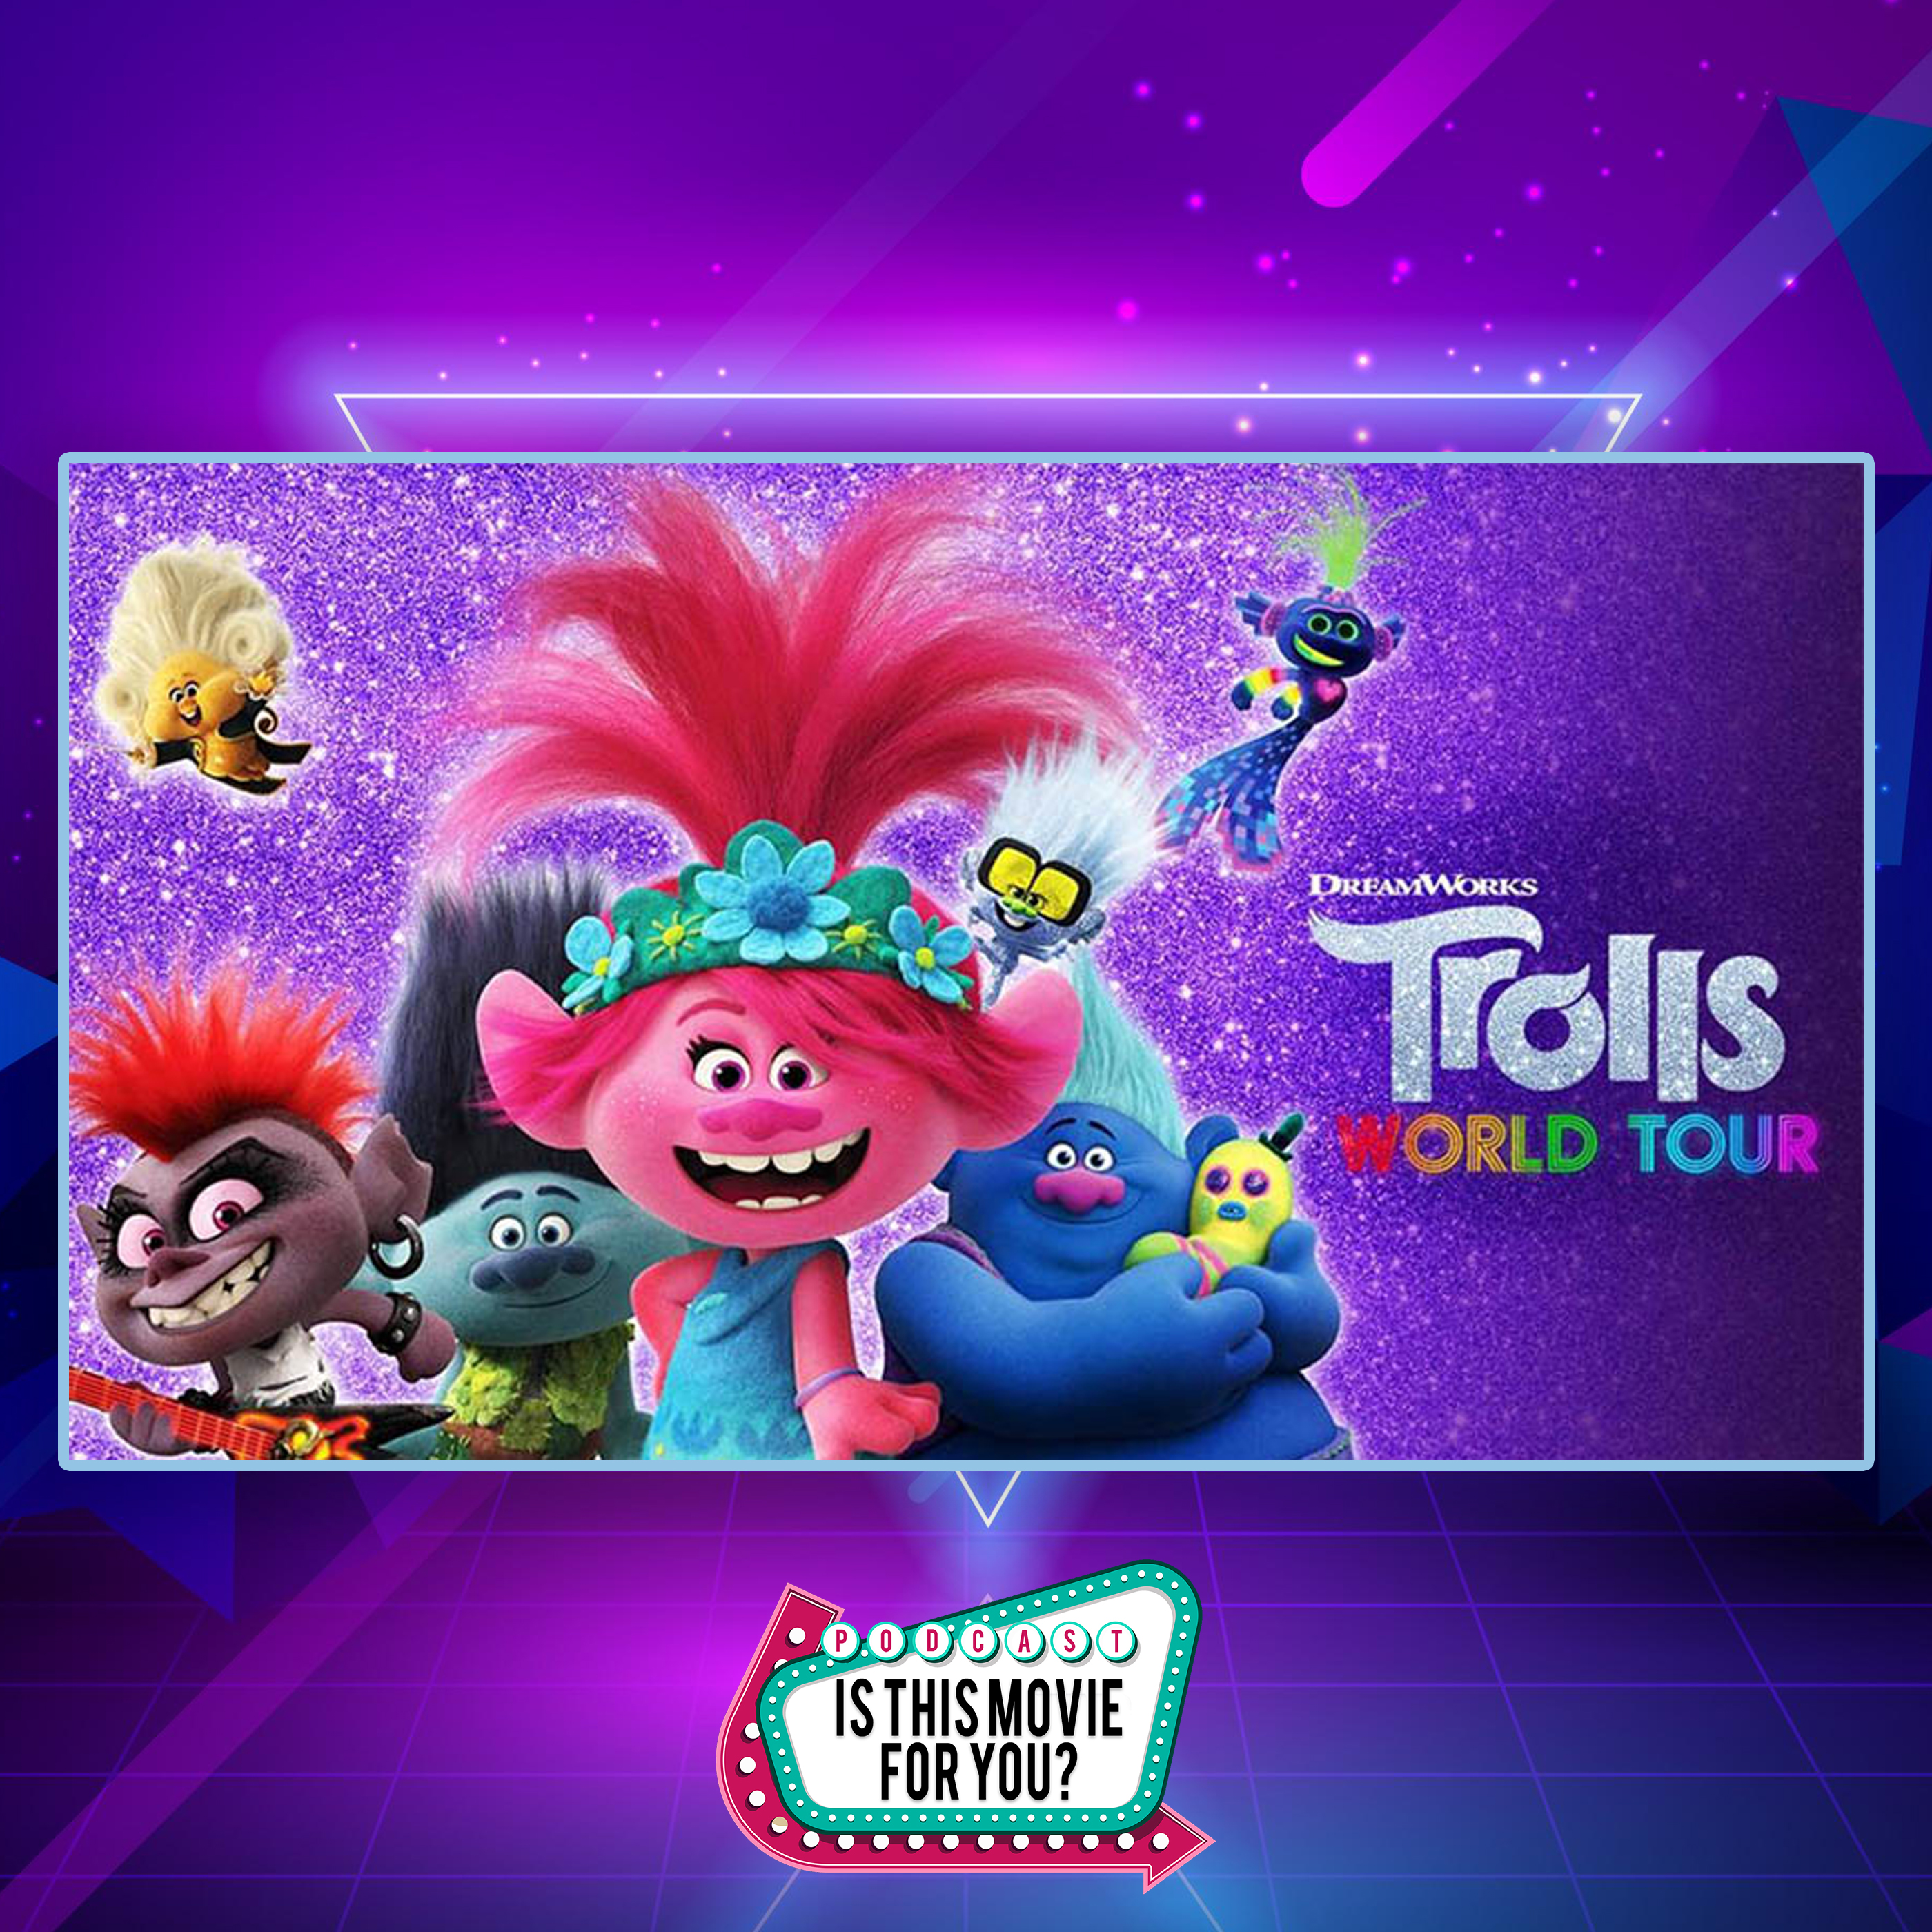 Is 'Trolls World Tour' the movie trailer for you?